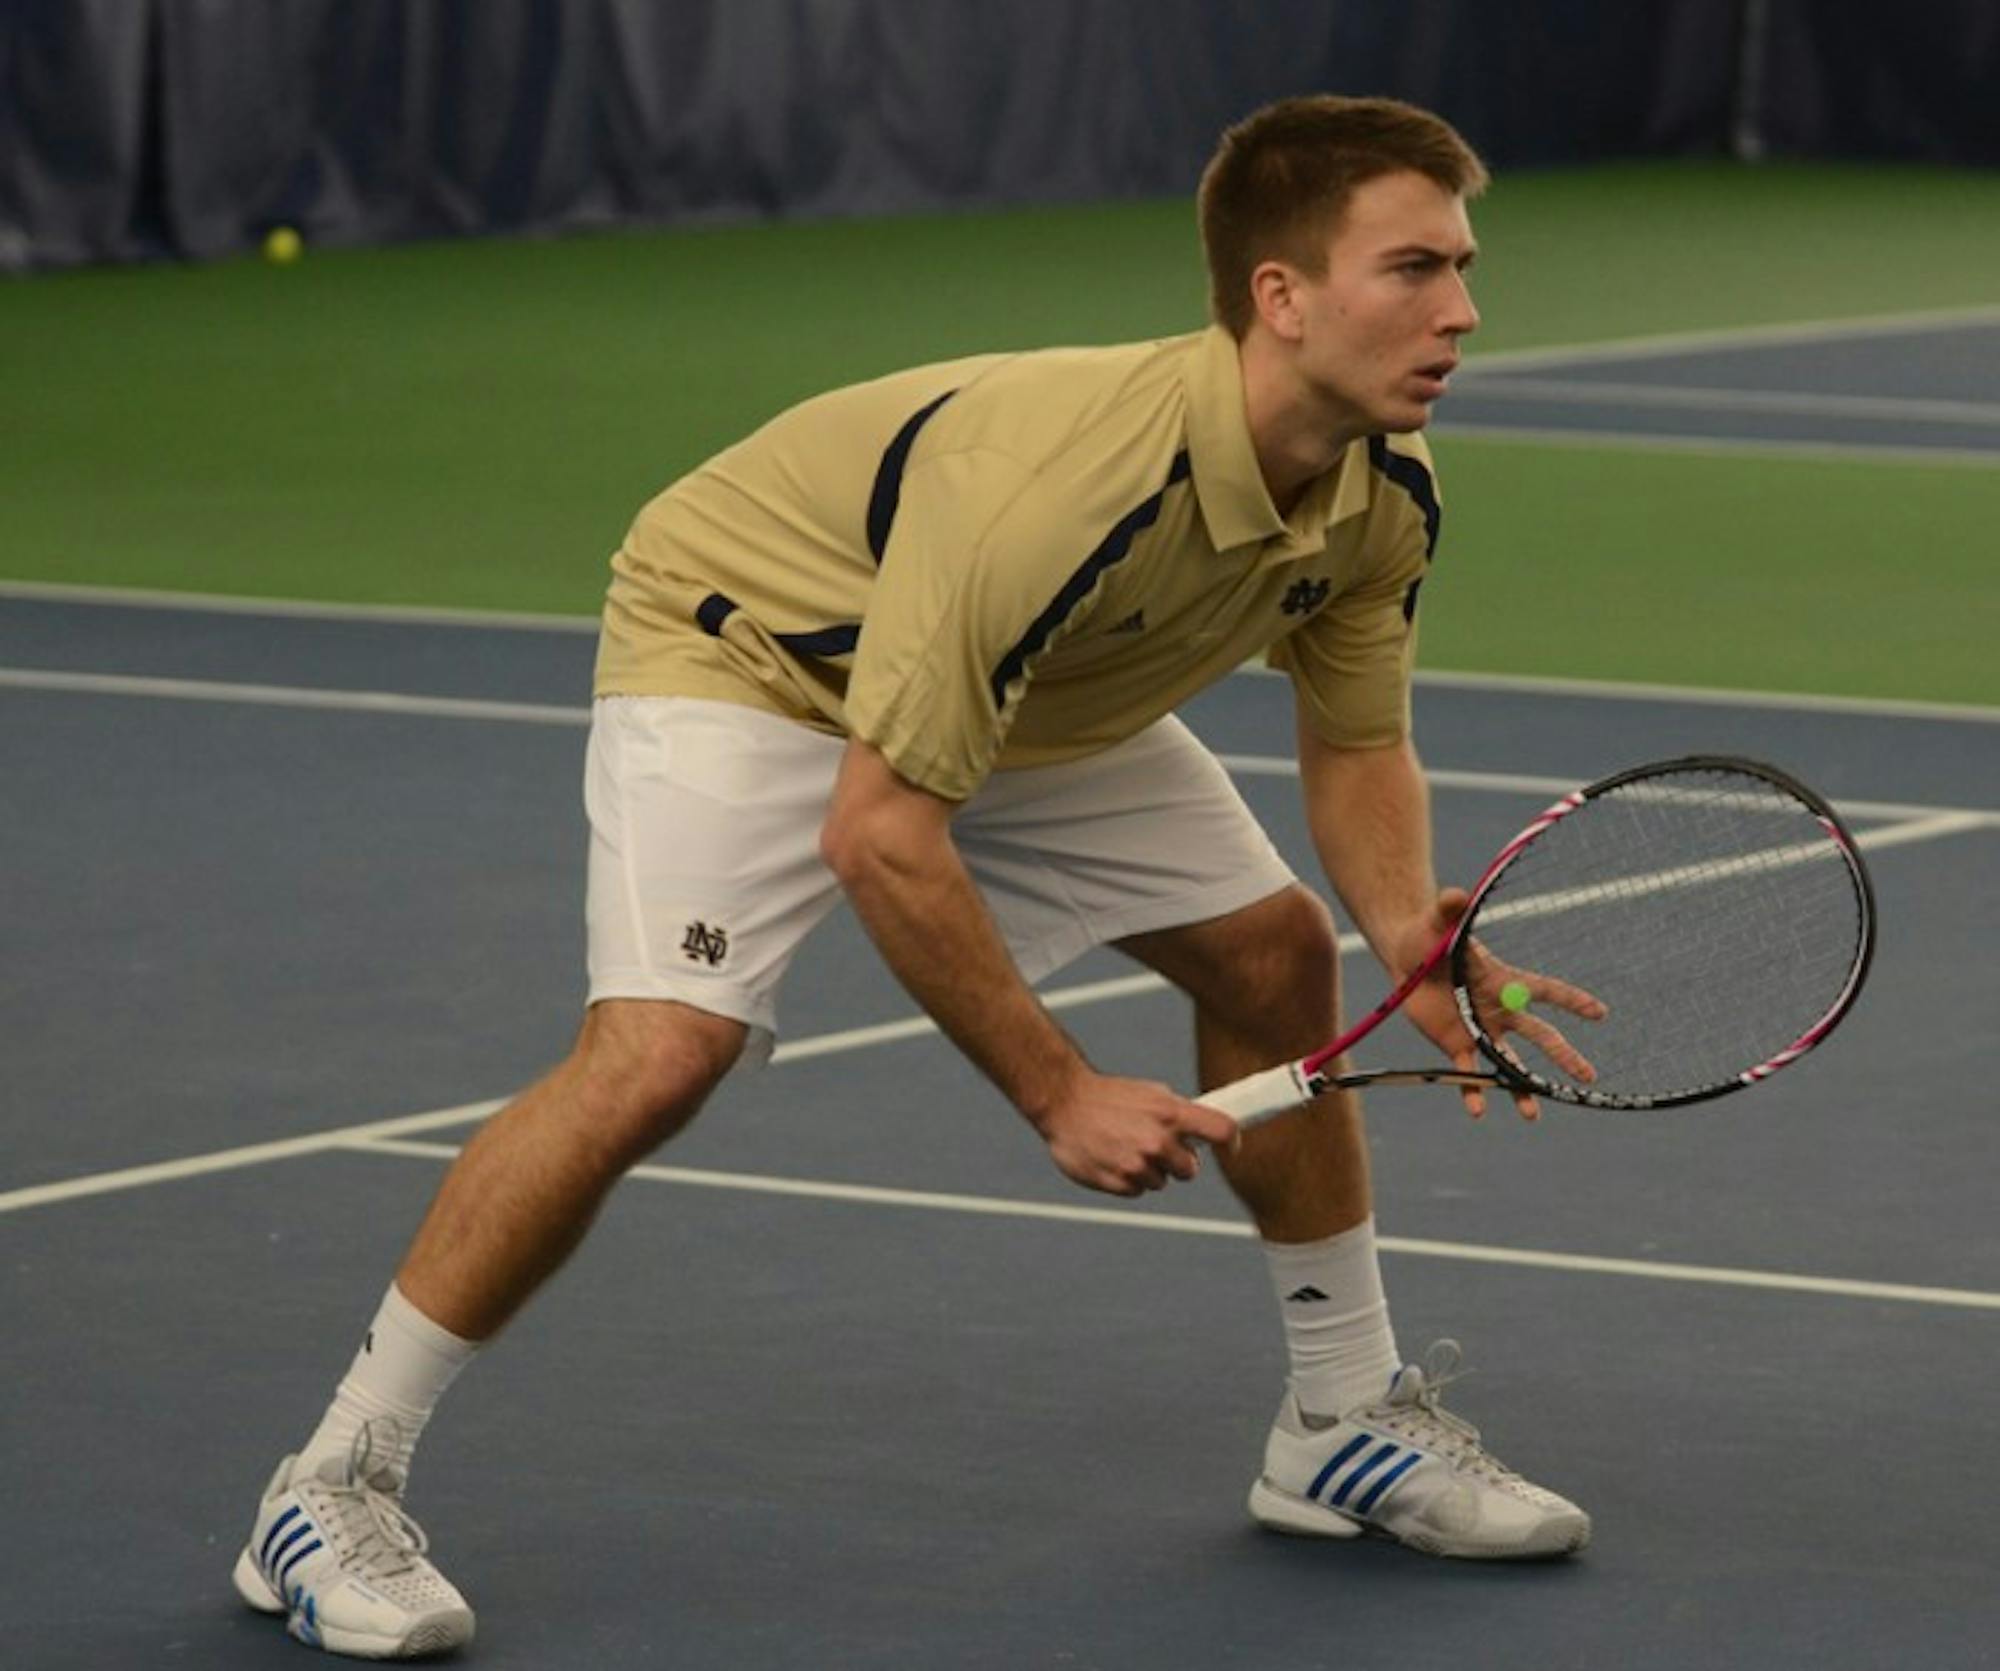 Senior Matt Dooley competes in a match against Marquette in Eck Tennis Pavilion on Jan. 19, 2013.